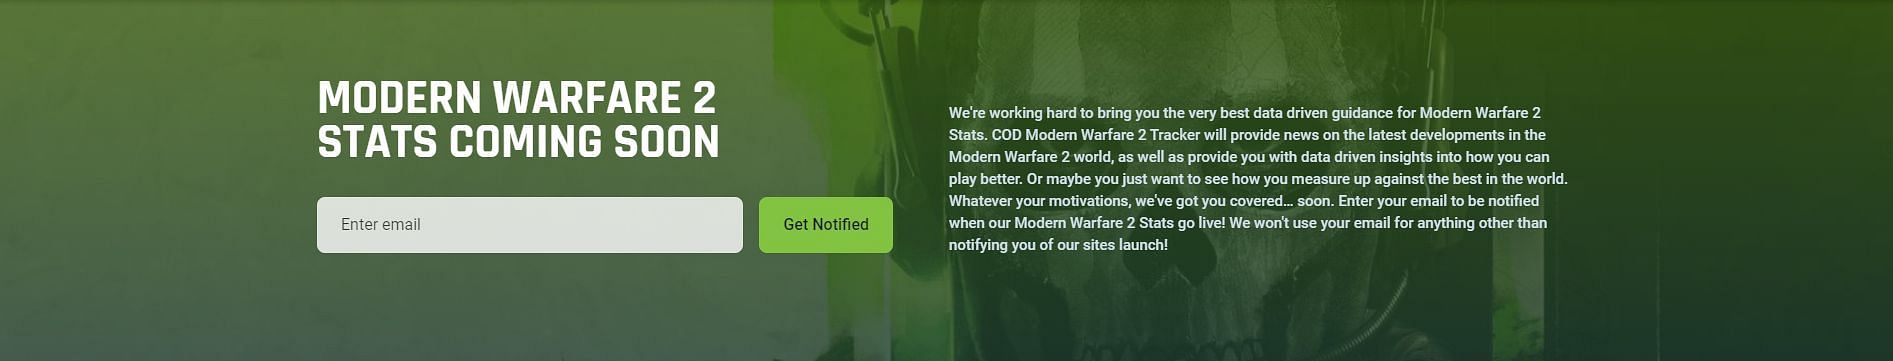 Joining the email list for Modern Warfare 2 and WZ 2 (image via COD Tracker)